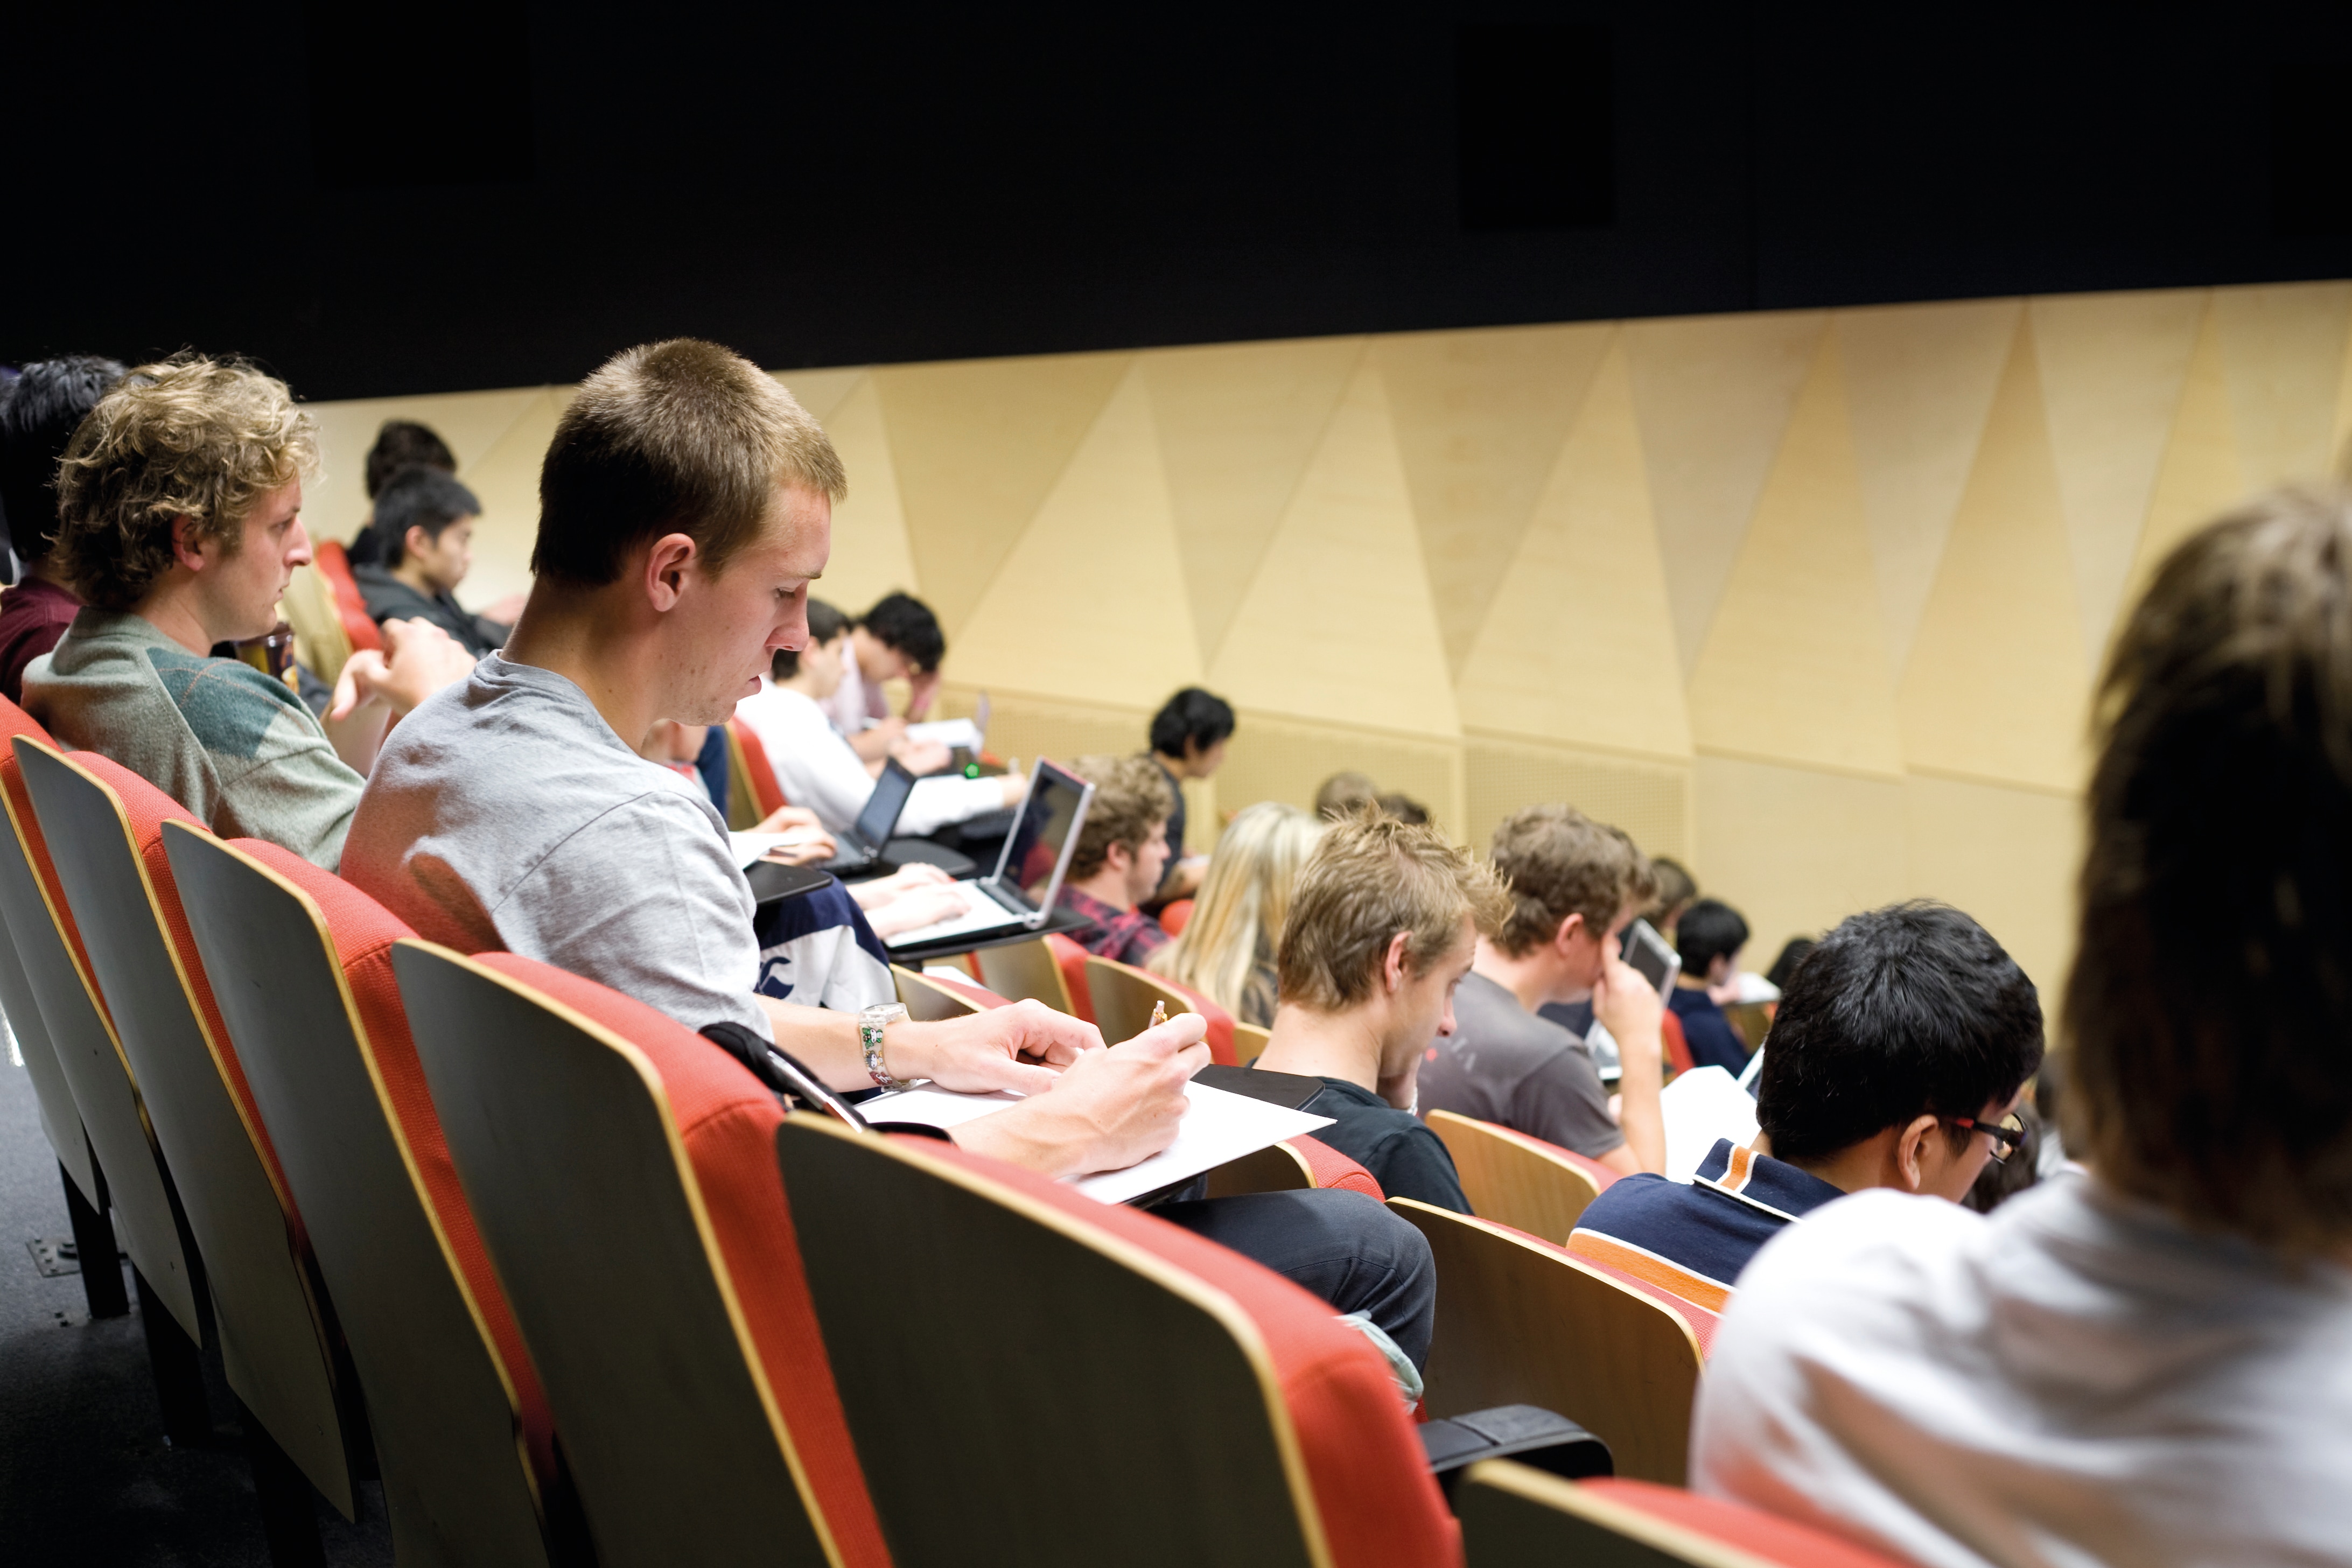 How to make the most of your university lectures